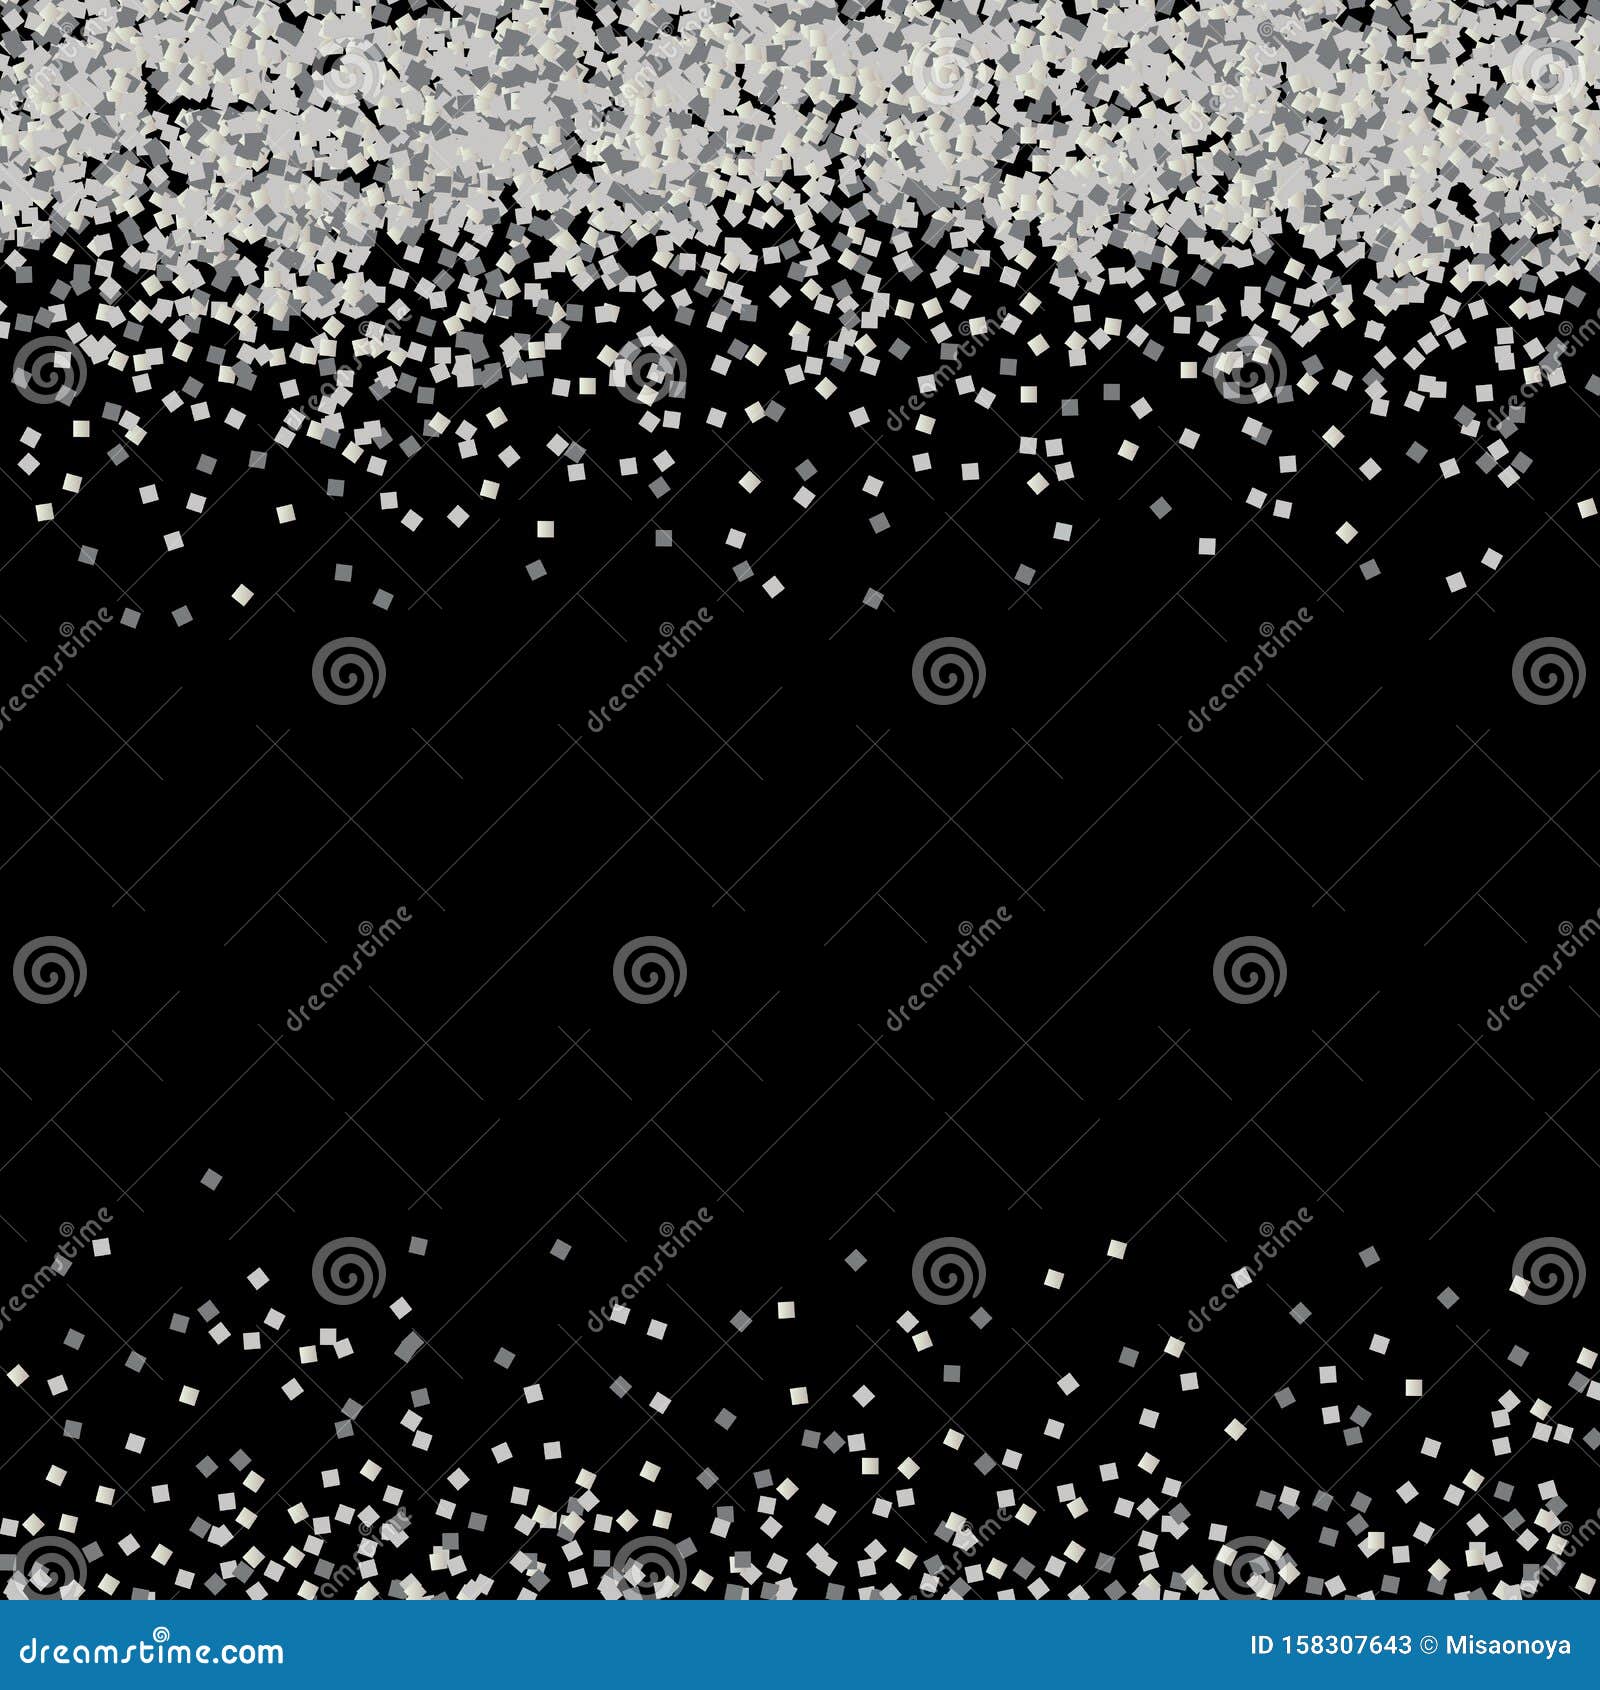 Silver Glitter Material Scattered Black Background Stock Vector -  Illustration of decorative, holiday: 158307643